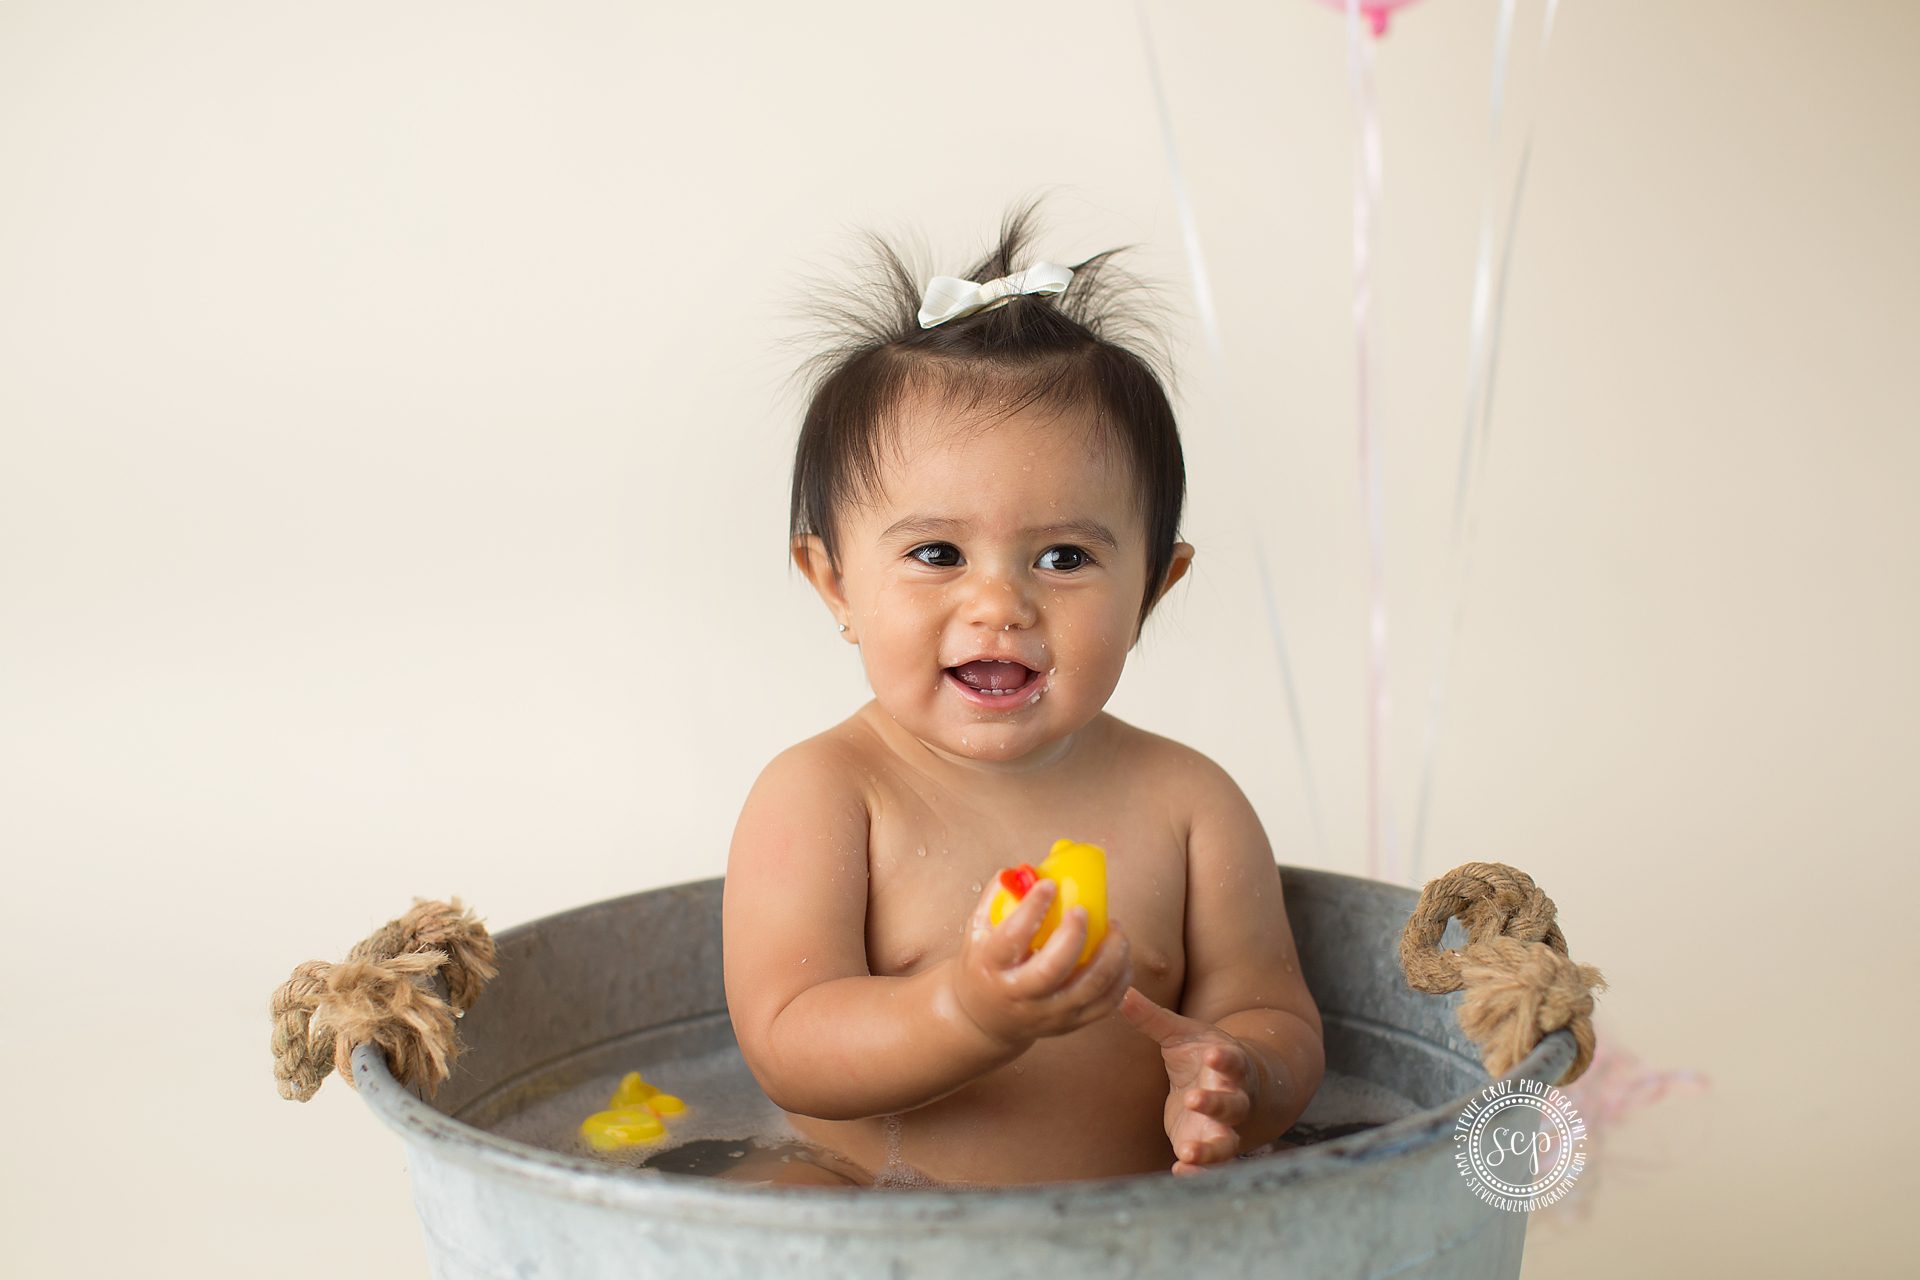 Unique cake smash photo ideas for little girls, a bubble bath with rubber duckies and all